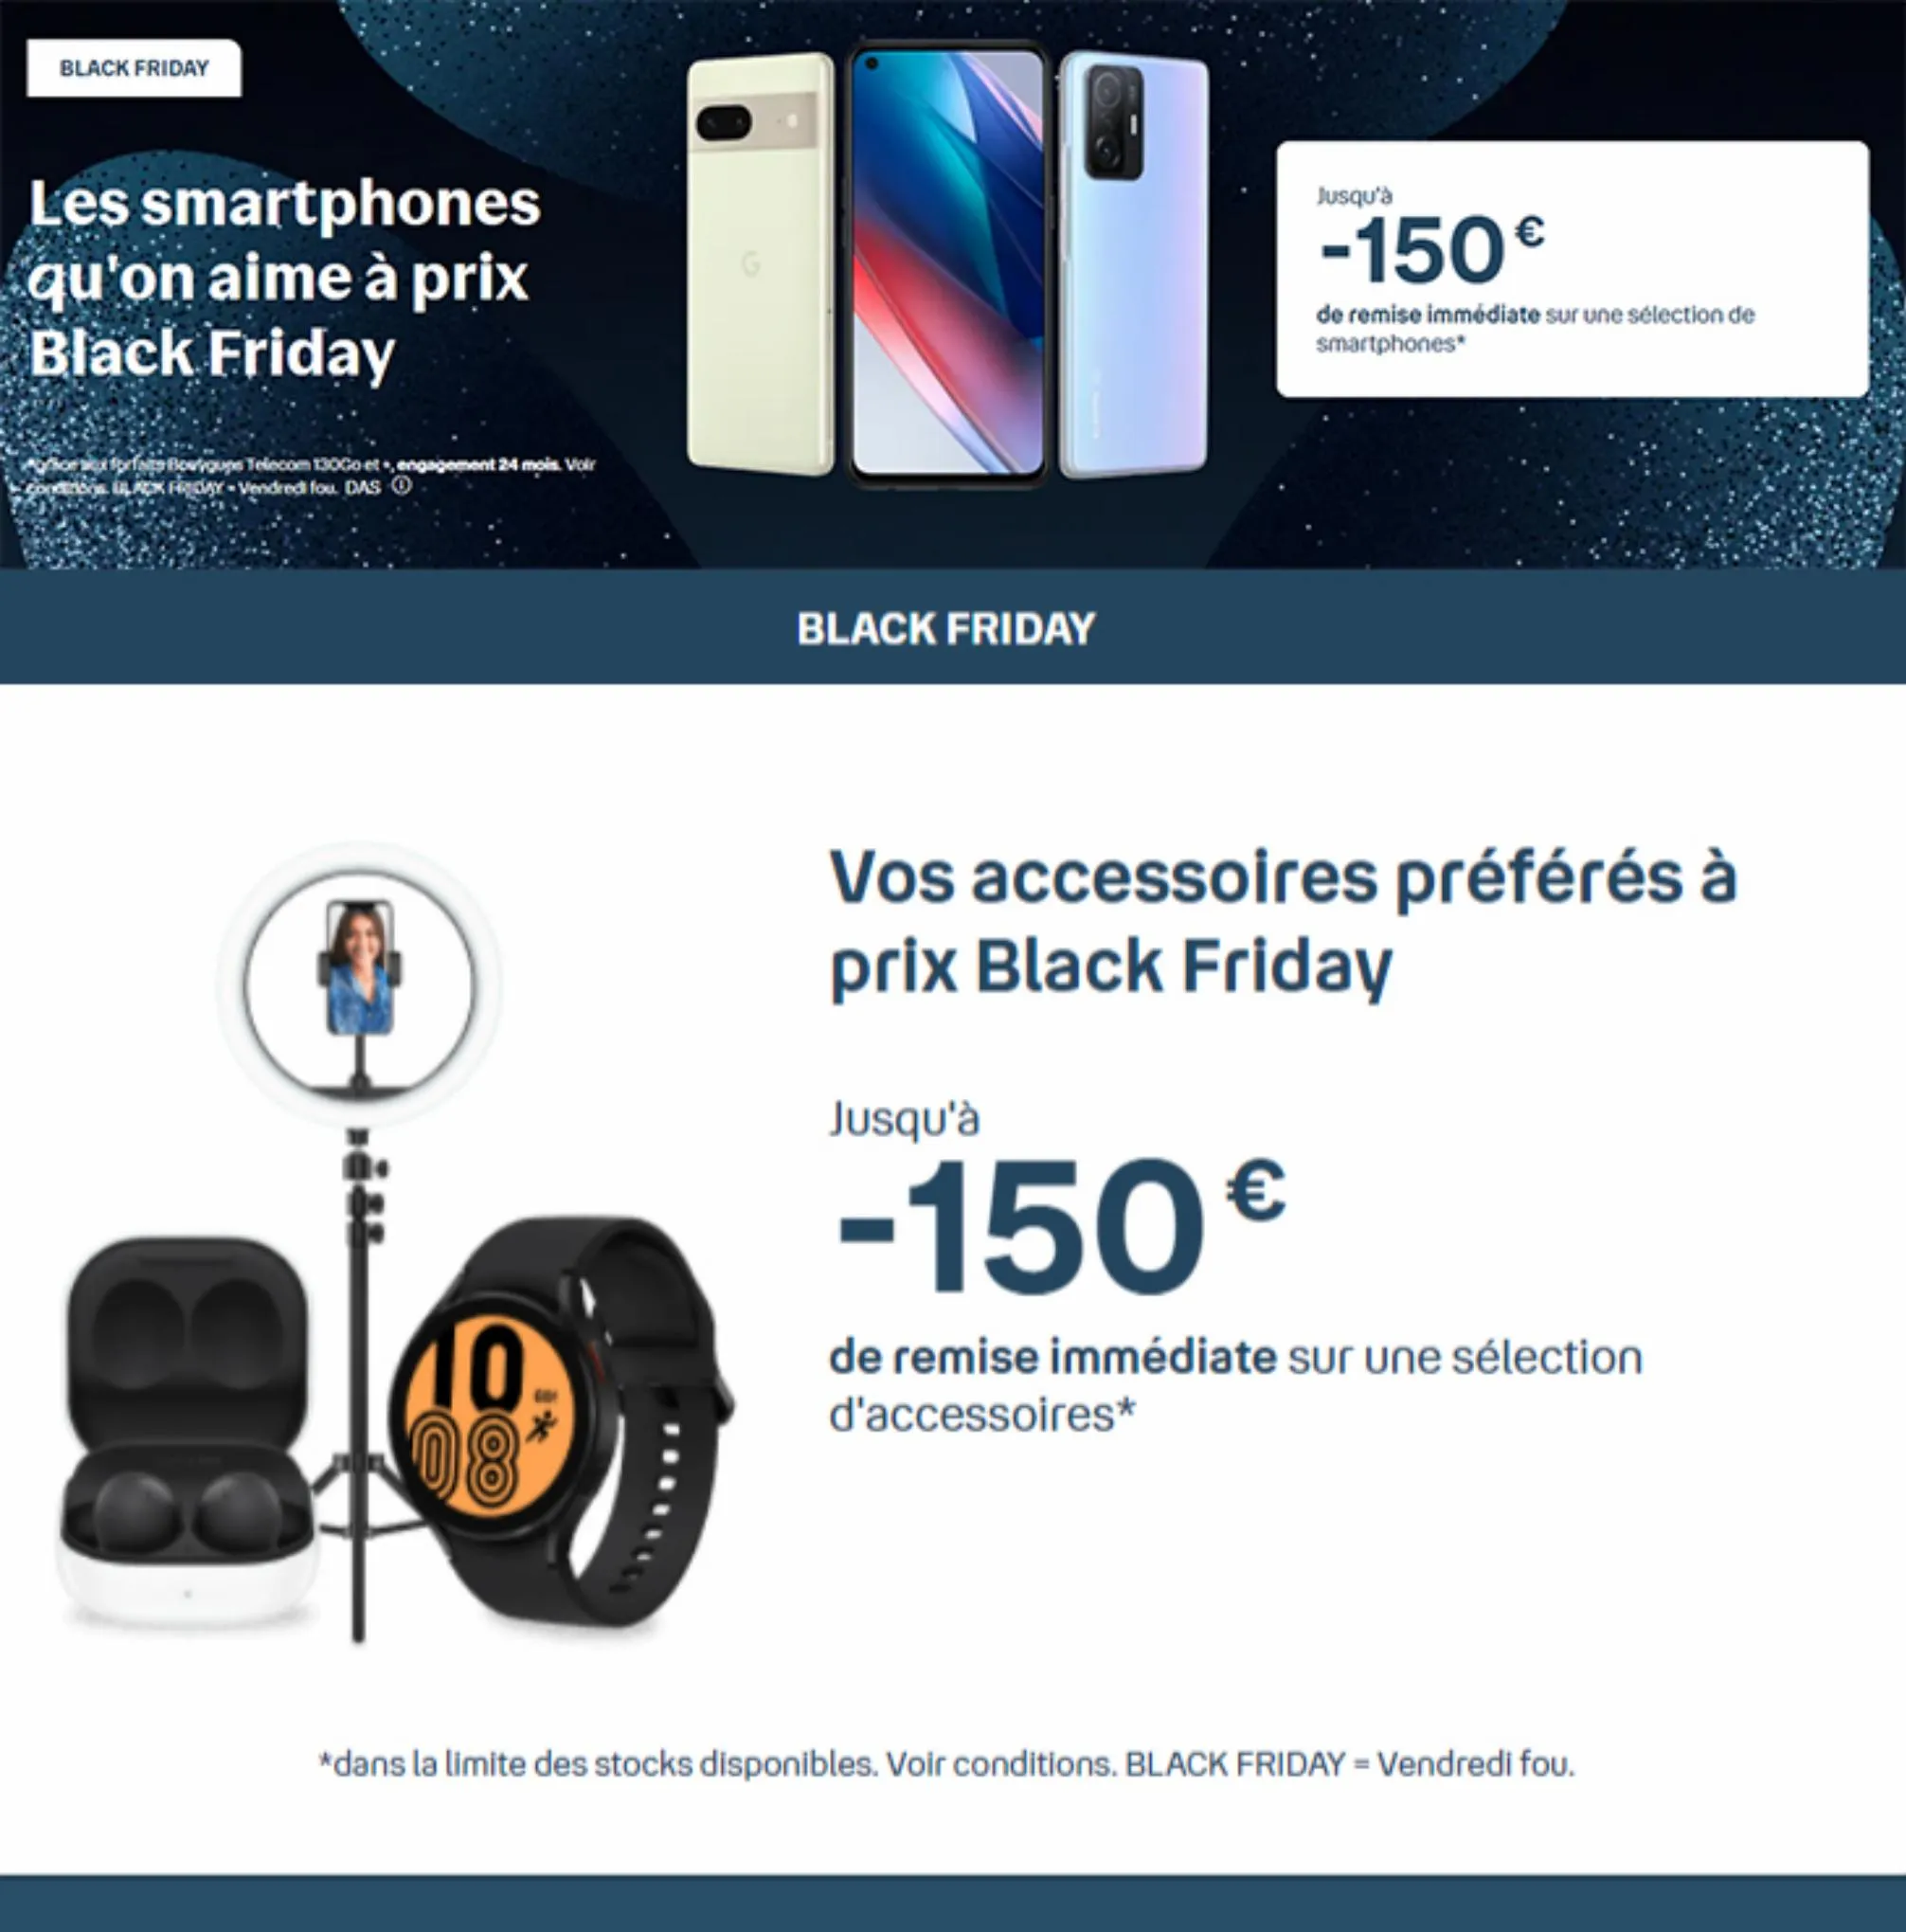 Catalogue Offres Bouygues Telecom Black Friday, page 00004